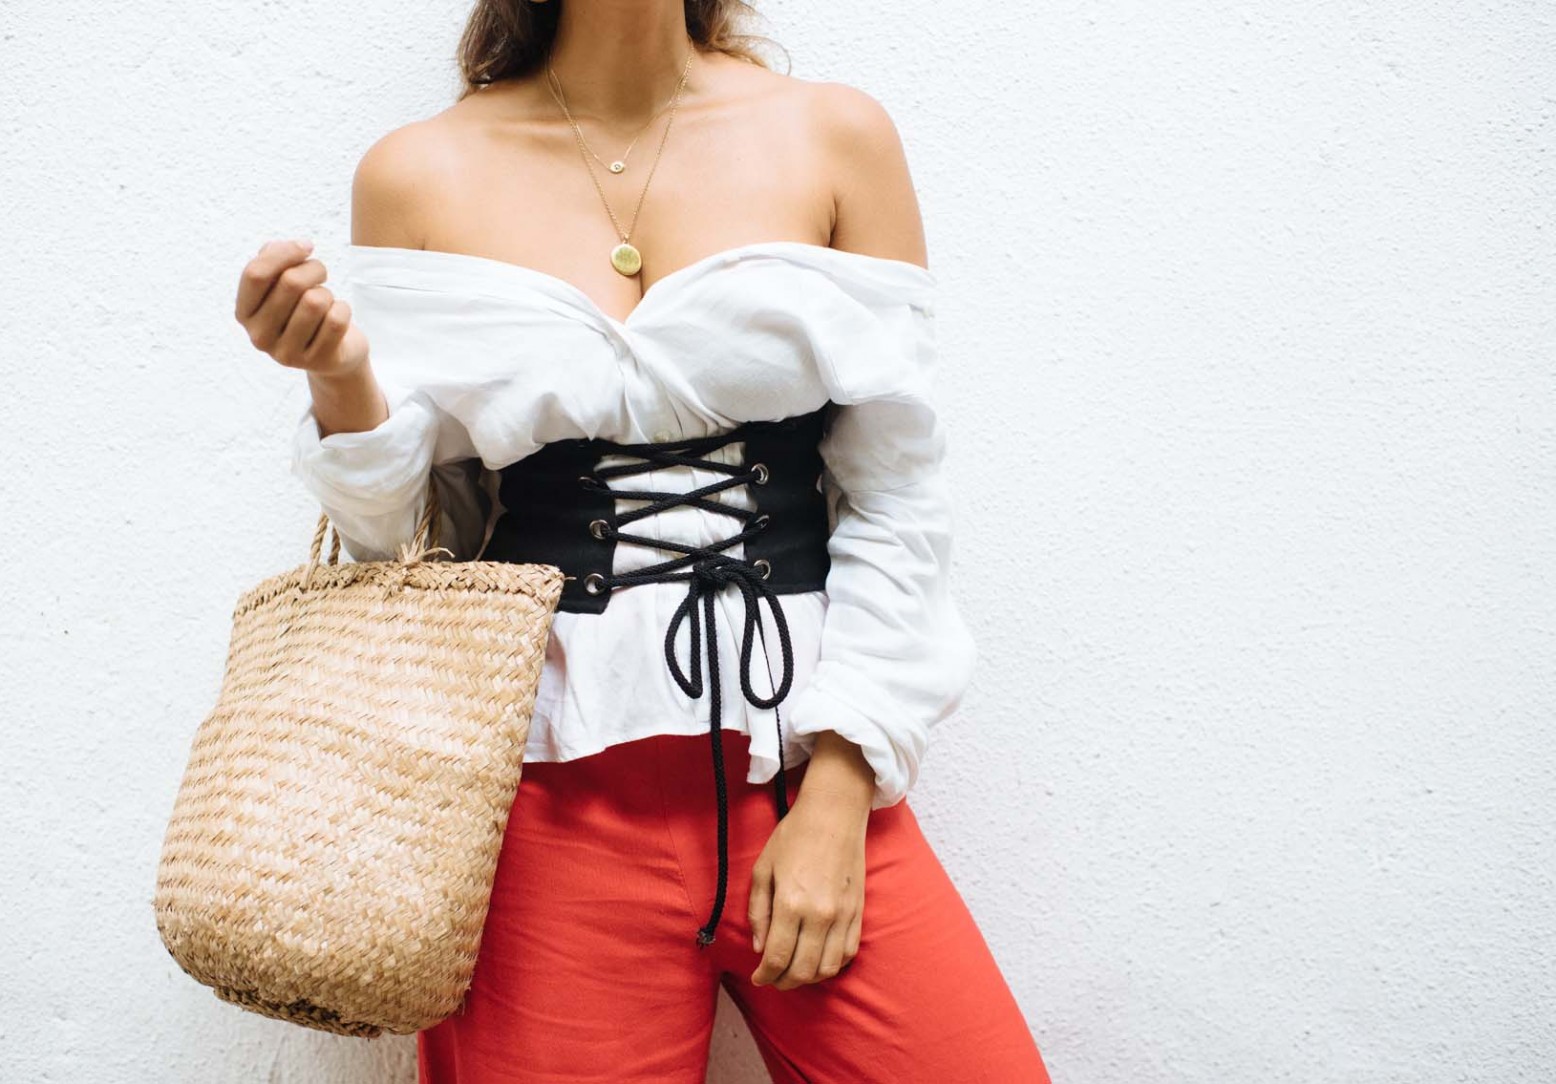 Corset belts can honestly put together and complete every look